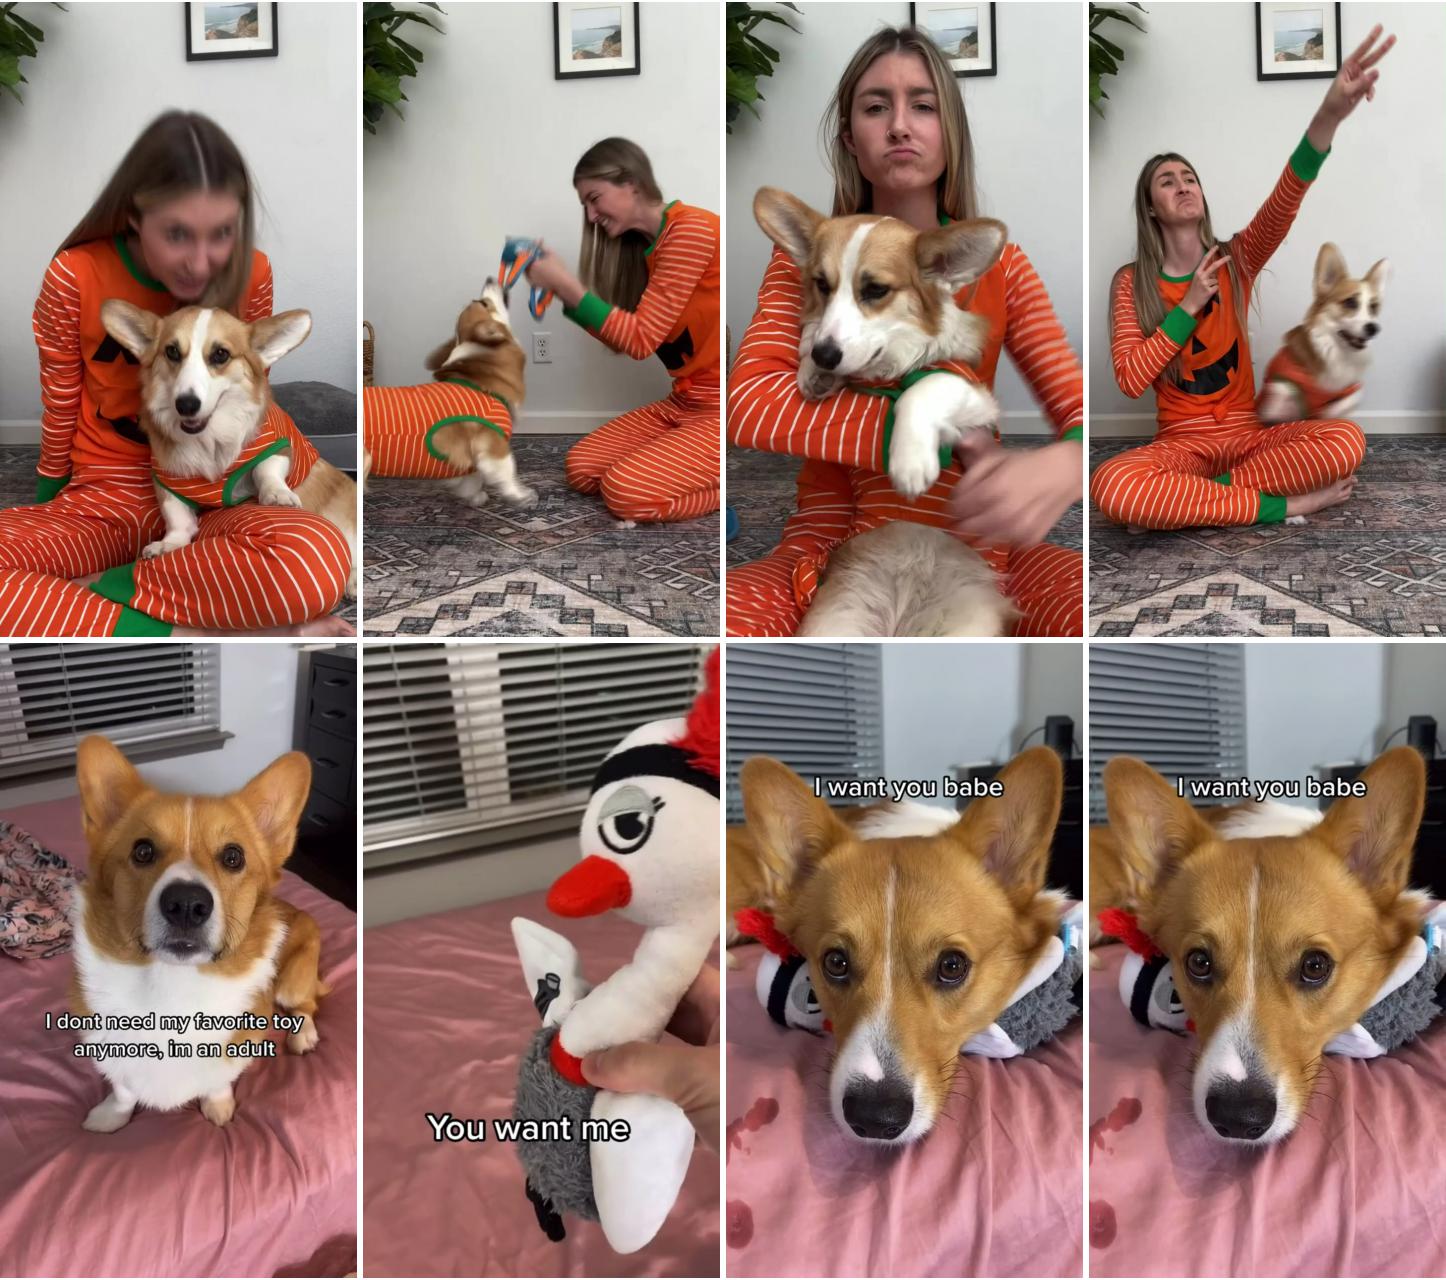 Matching halloween pjs with my dog ; corgi wants his toy, cute dog videos